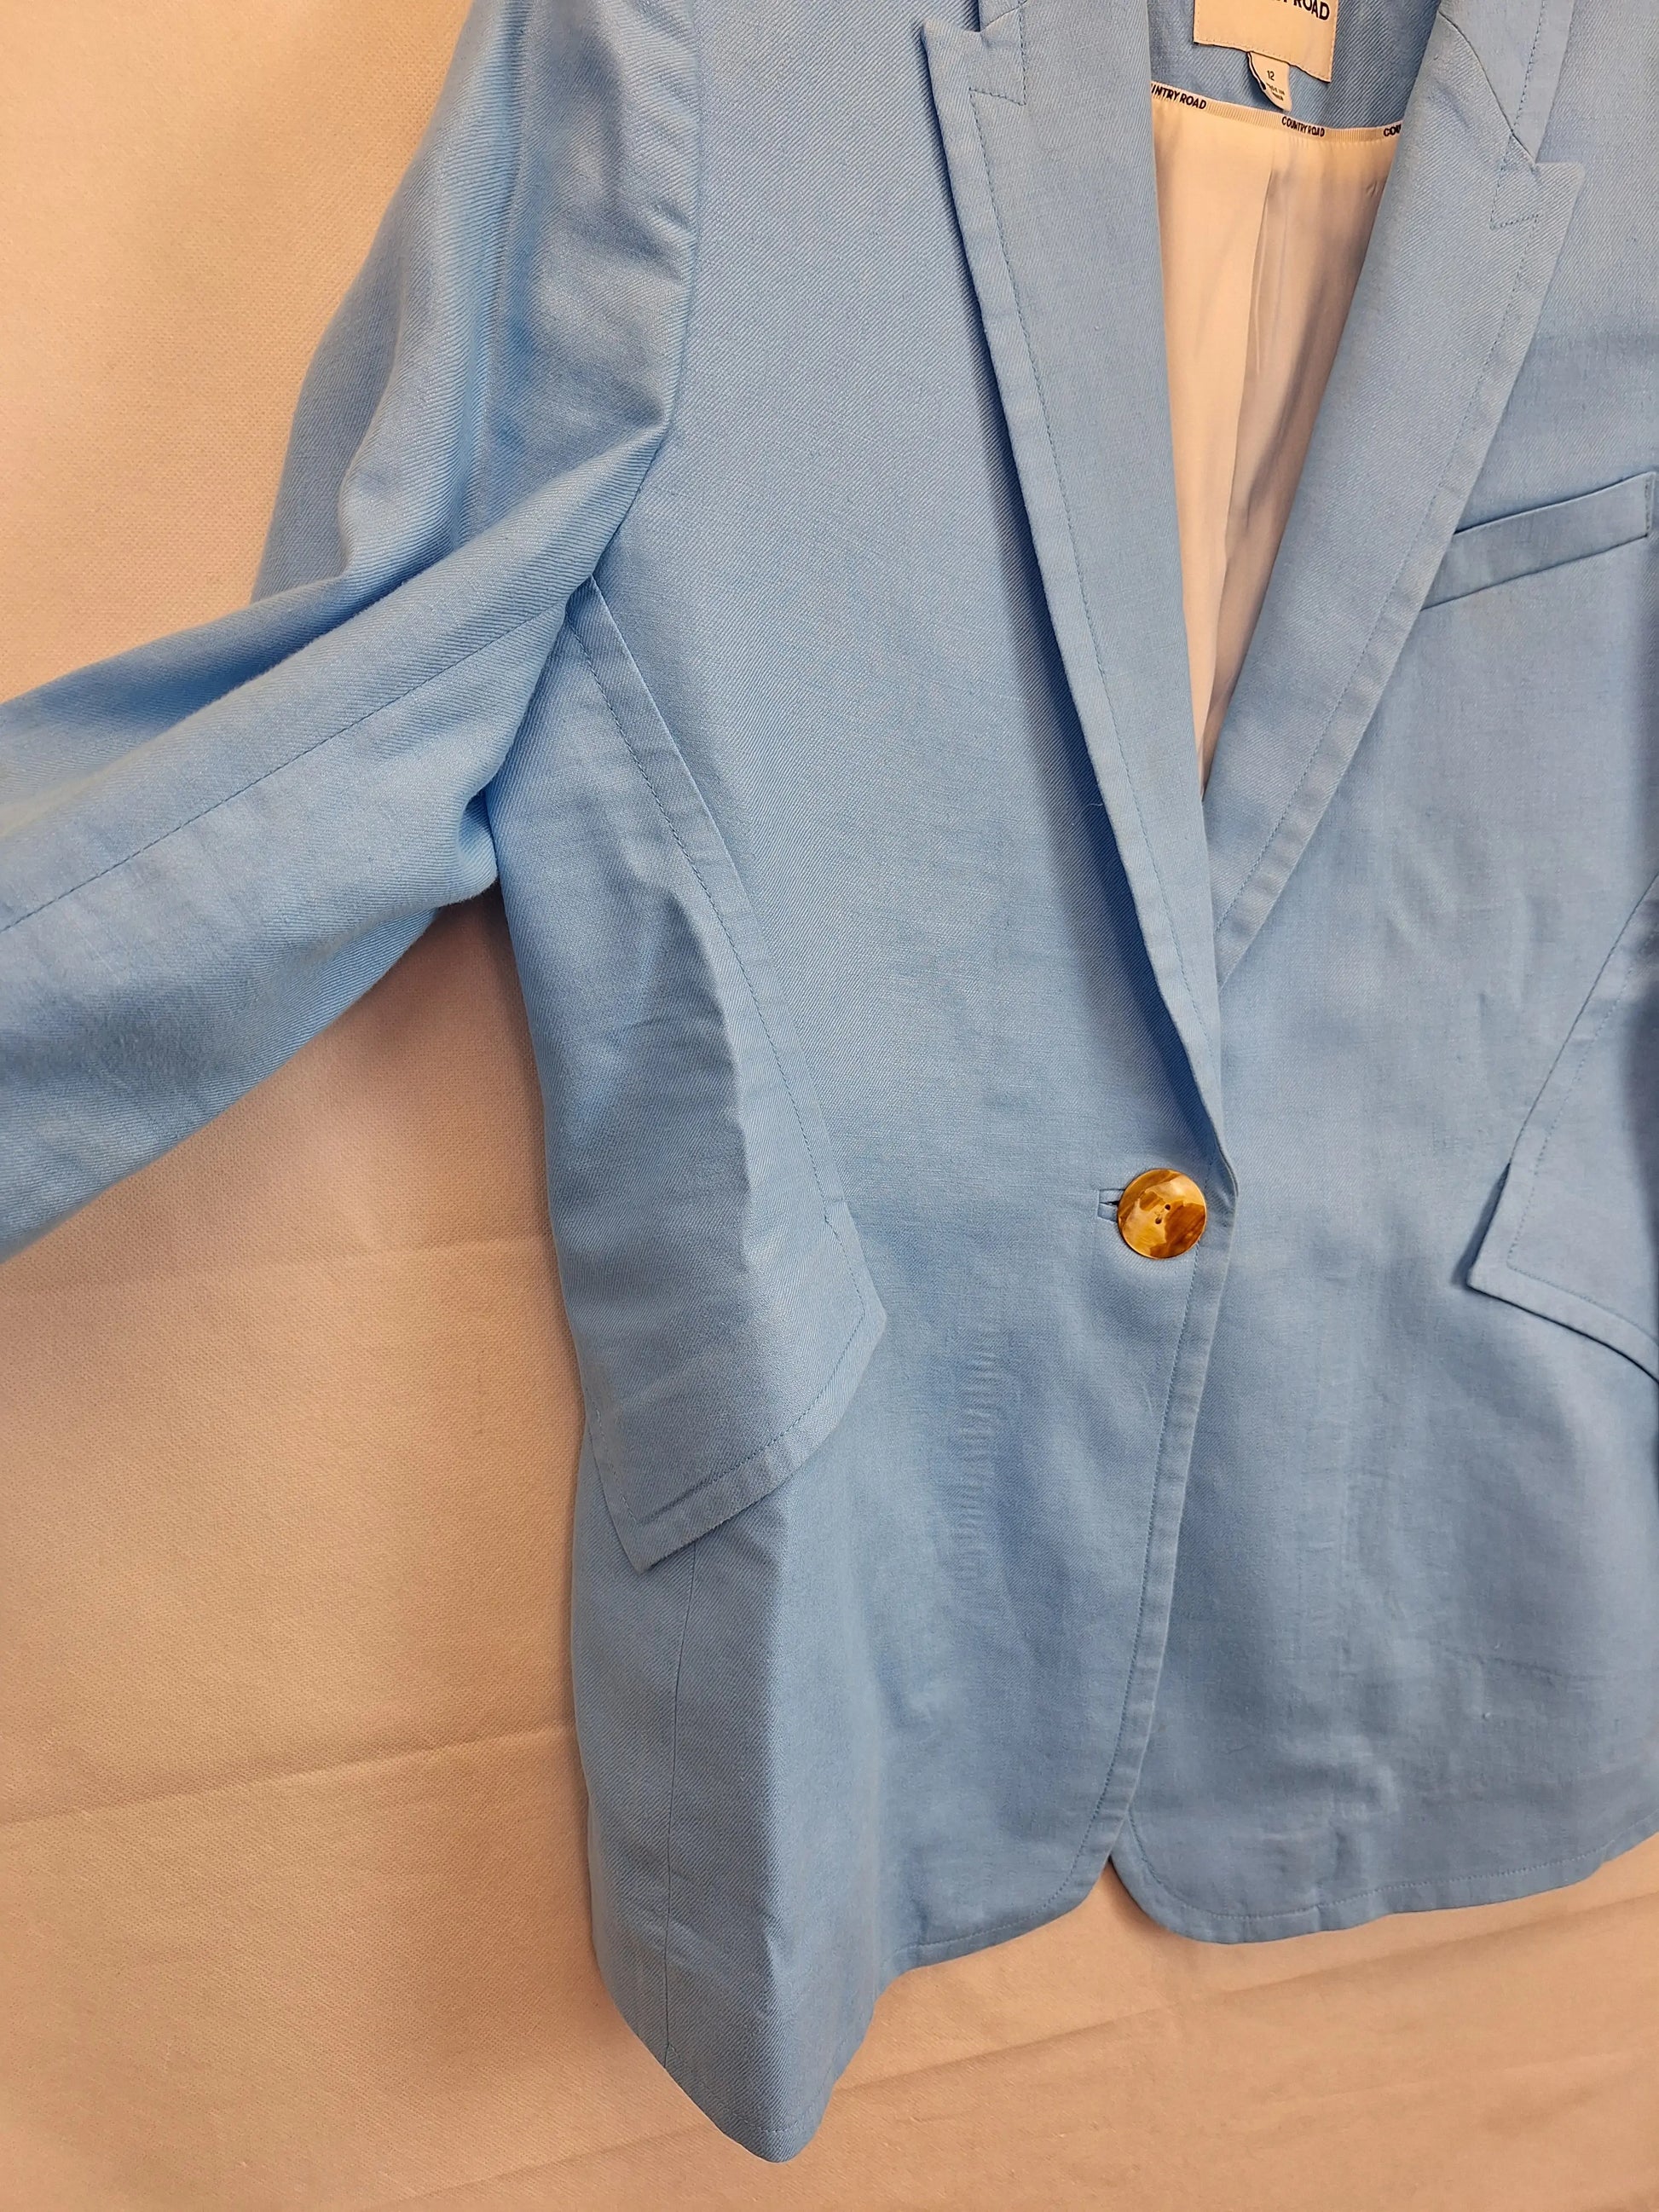 Country Road Classic Pastel Linen Blazer Size 12 by SwapUp-Online Second Hand Store-Online Thrift Store